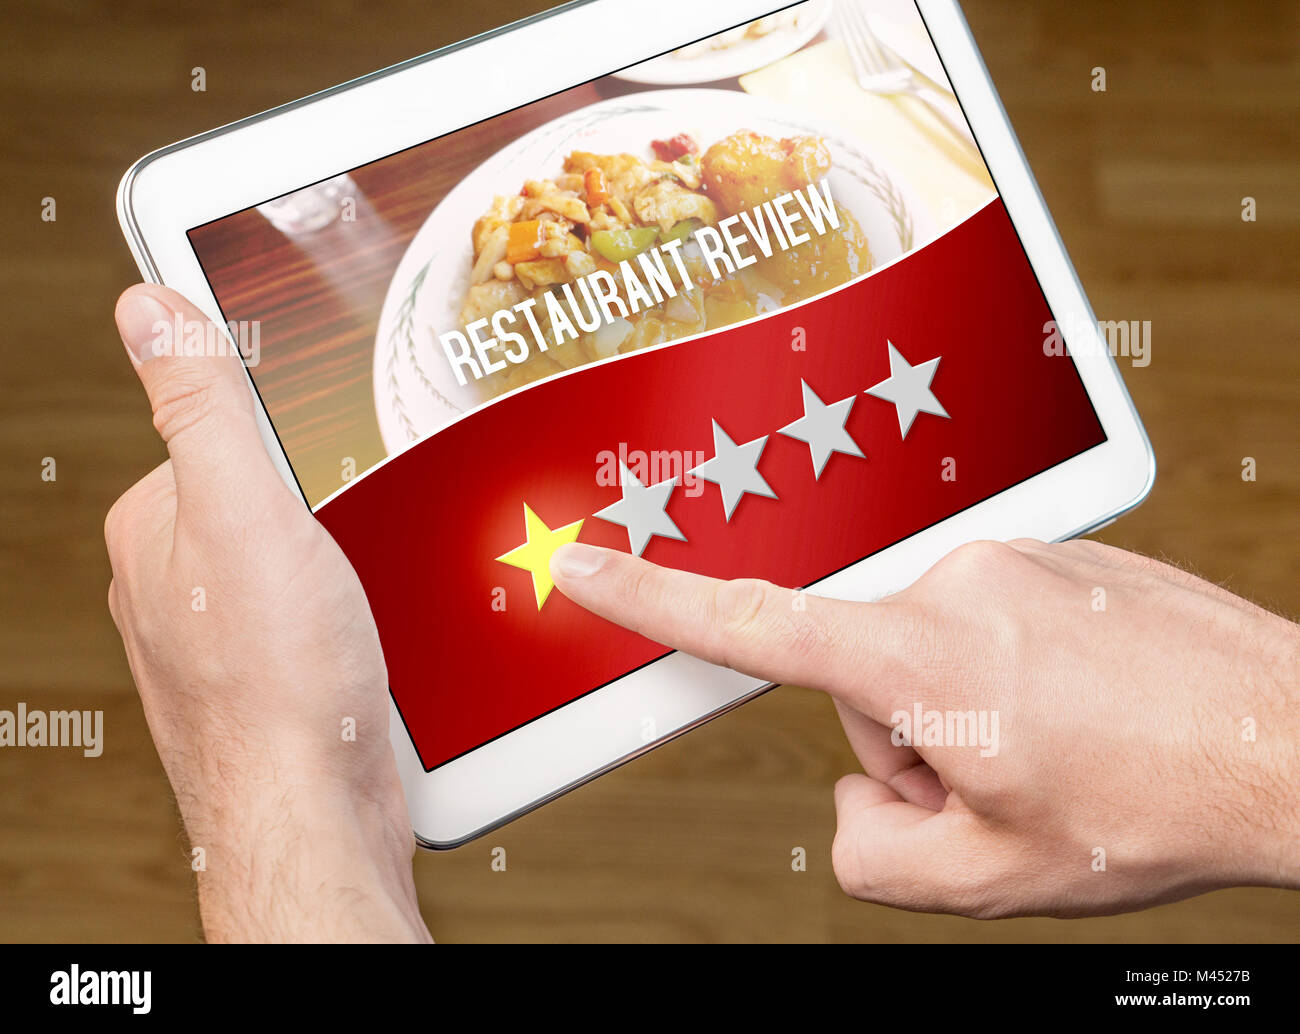 Bad restaurant review. Disappointed and dissatisfied customer giving terrible rating with tablet on an imaginary criticism site, application. Stock Photo